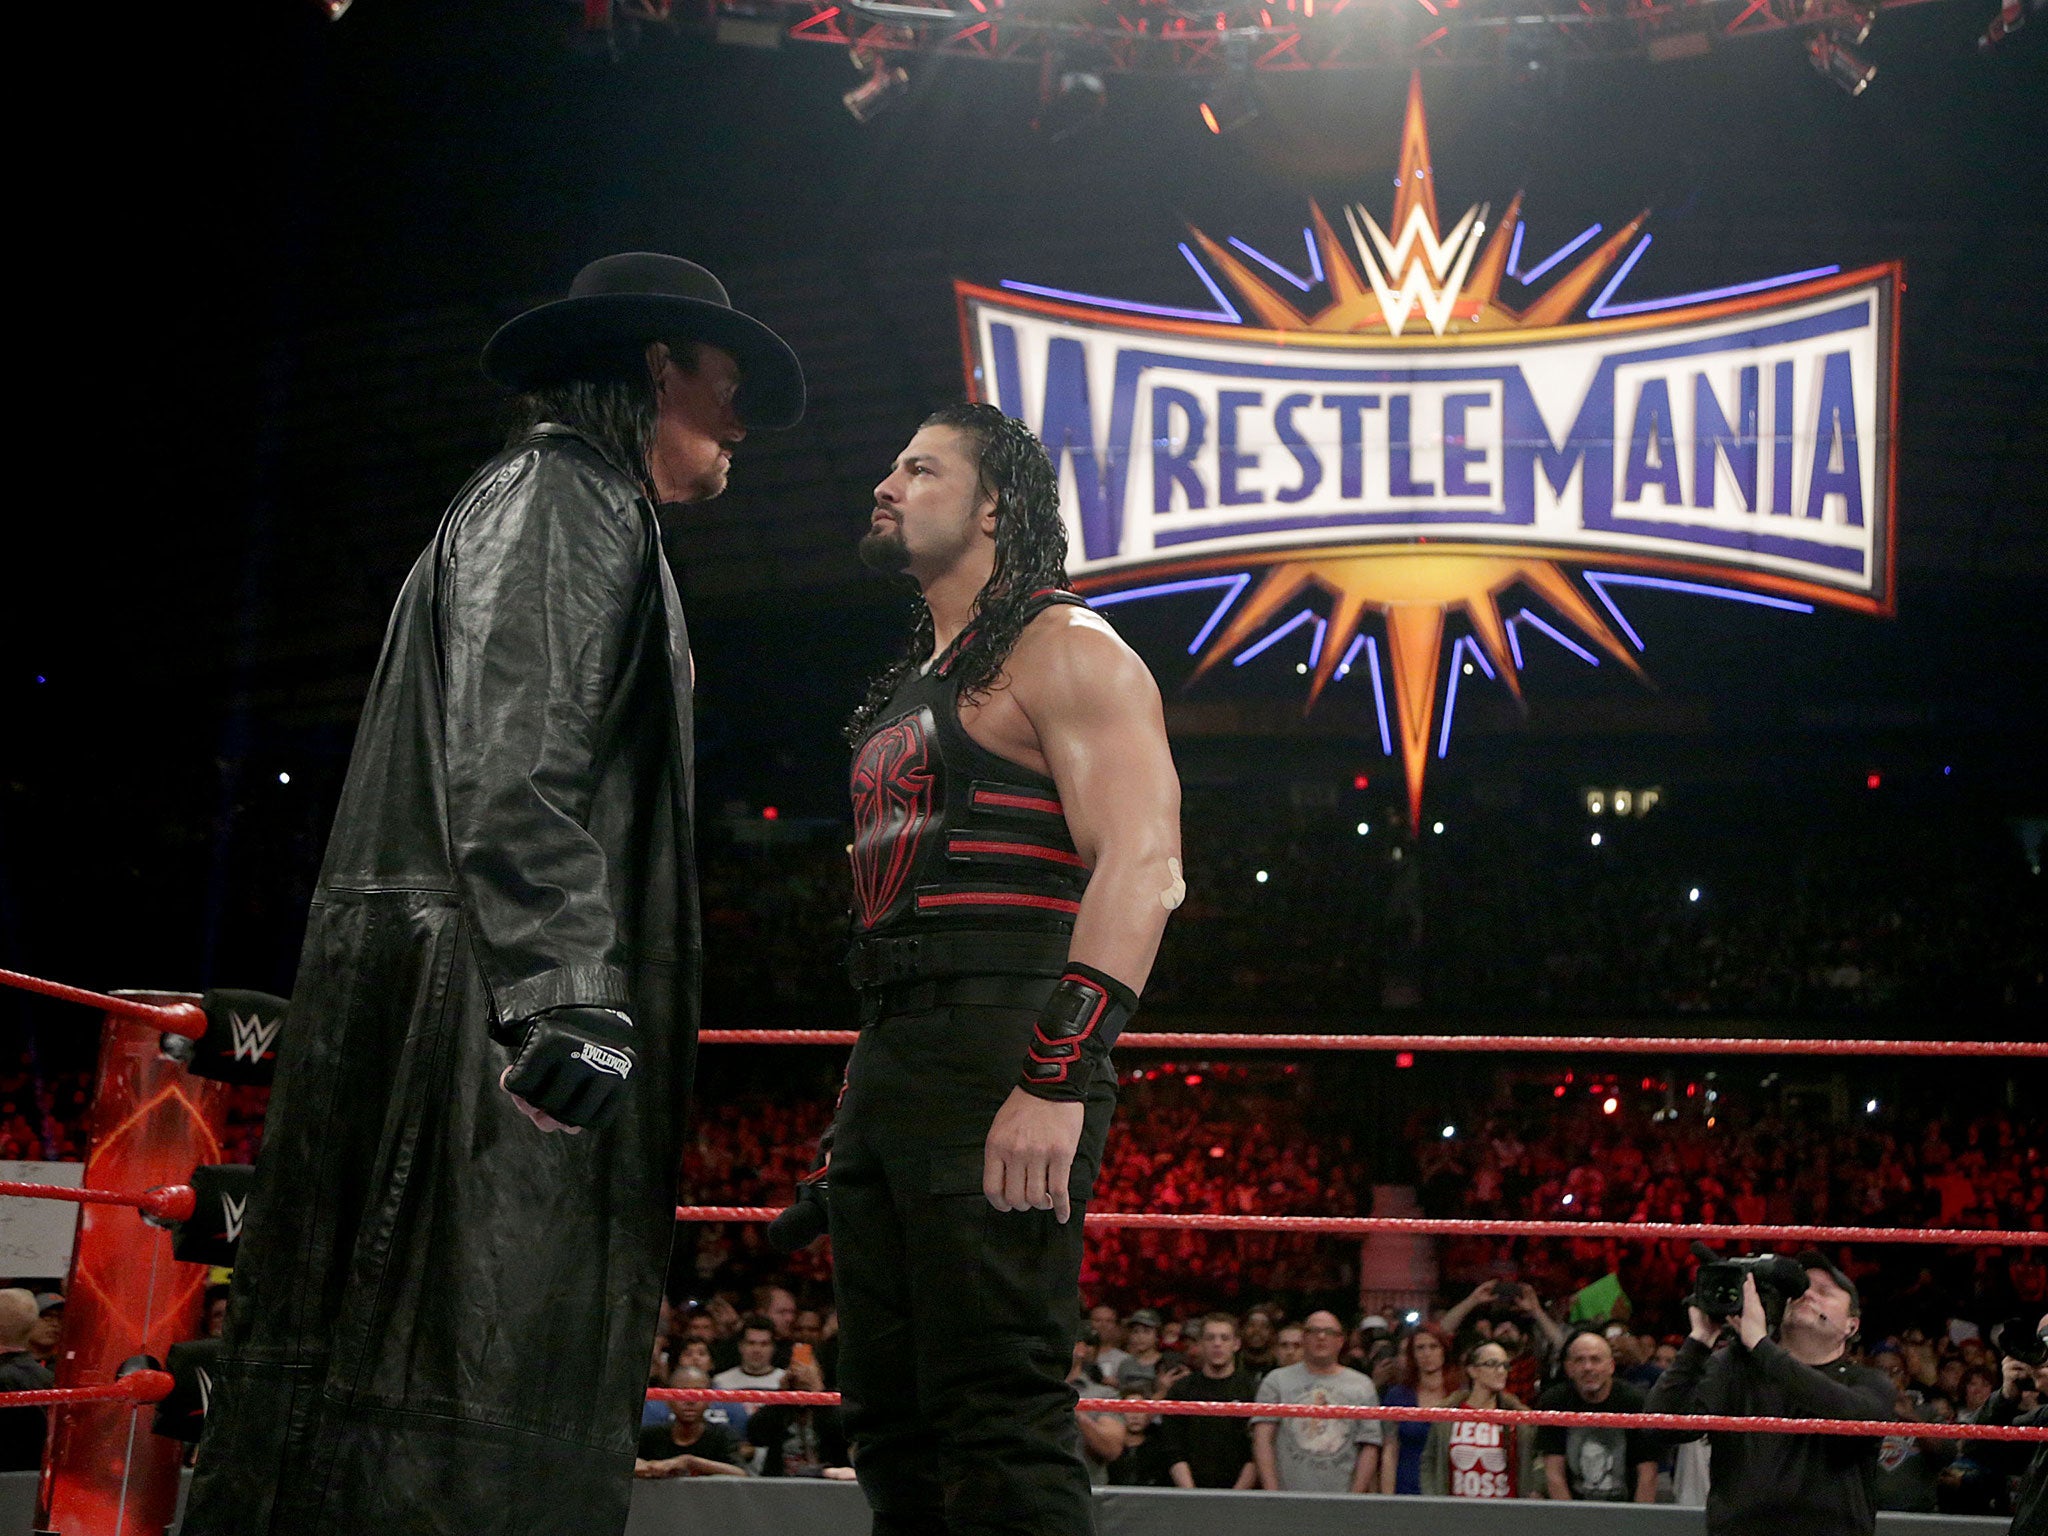 The Undertaker appeared to challenge Roman Reigns to a WrestleMania showdown